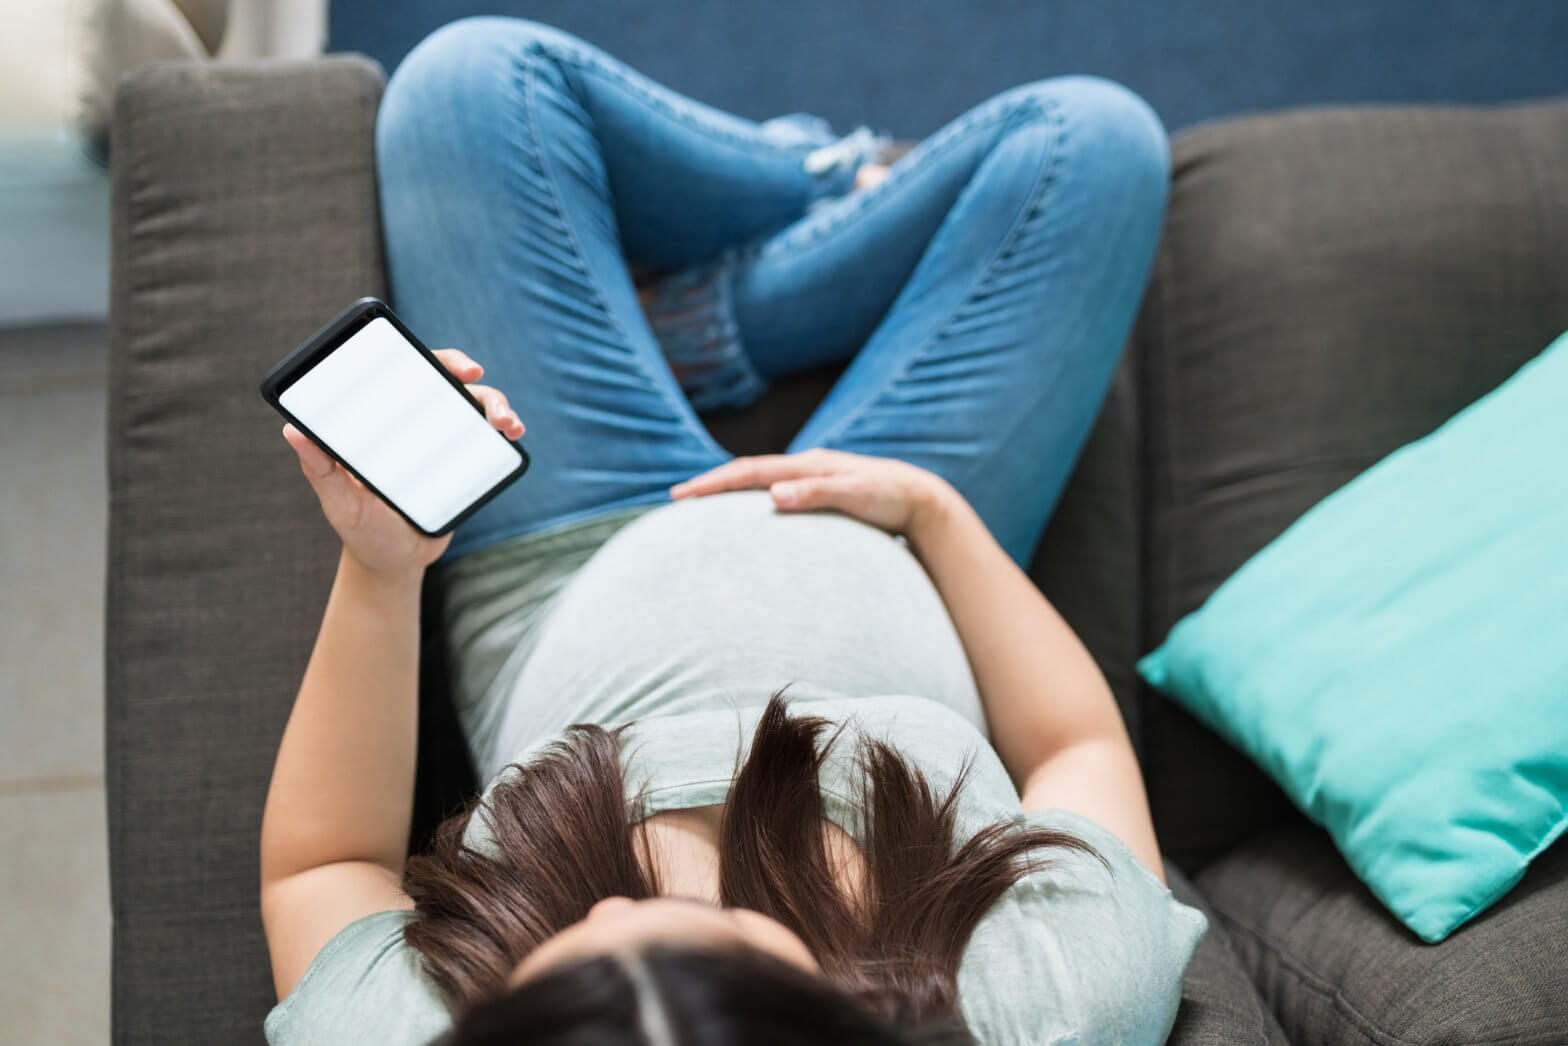 Caucasian pregnant woman relaxing while using smartphone in living room